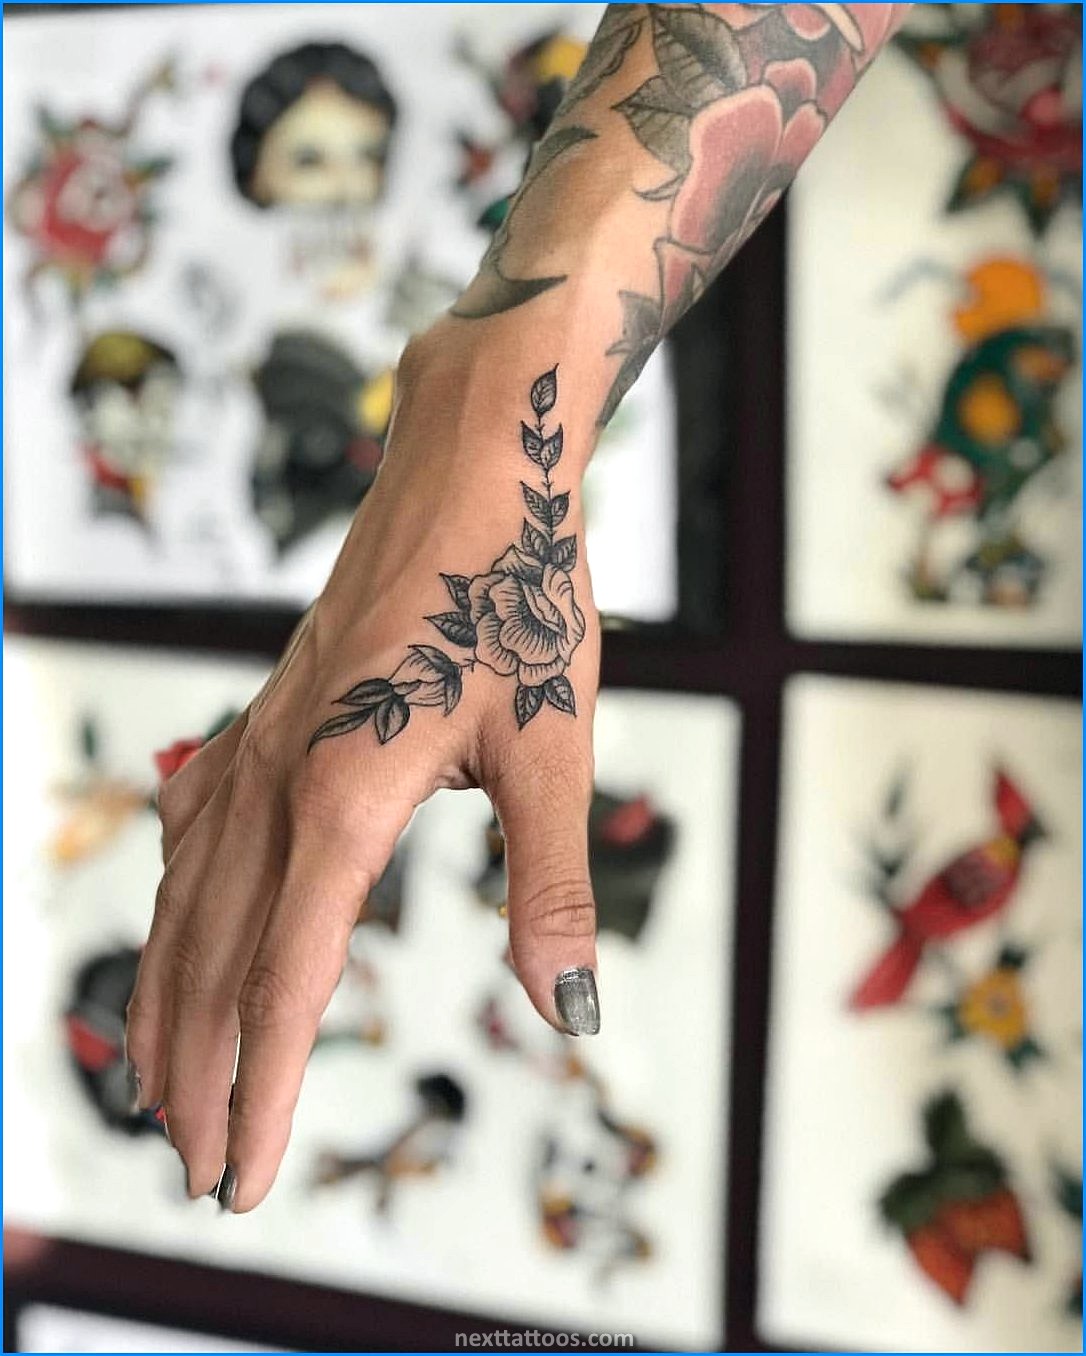 Female Hand Tattoos With Meaning